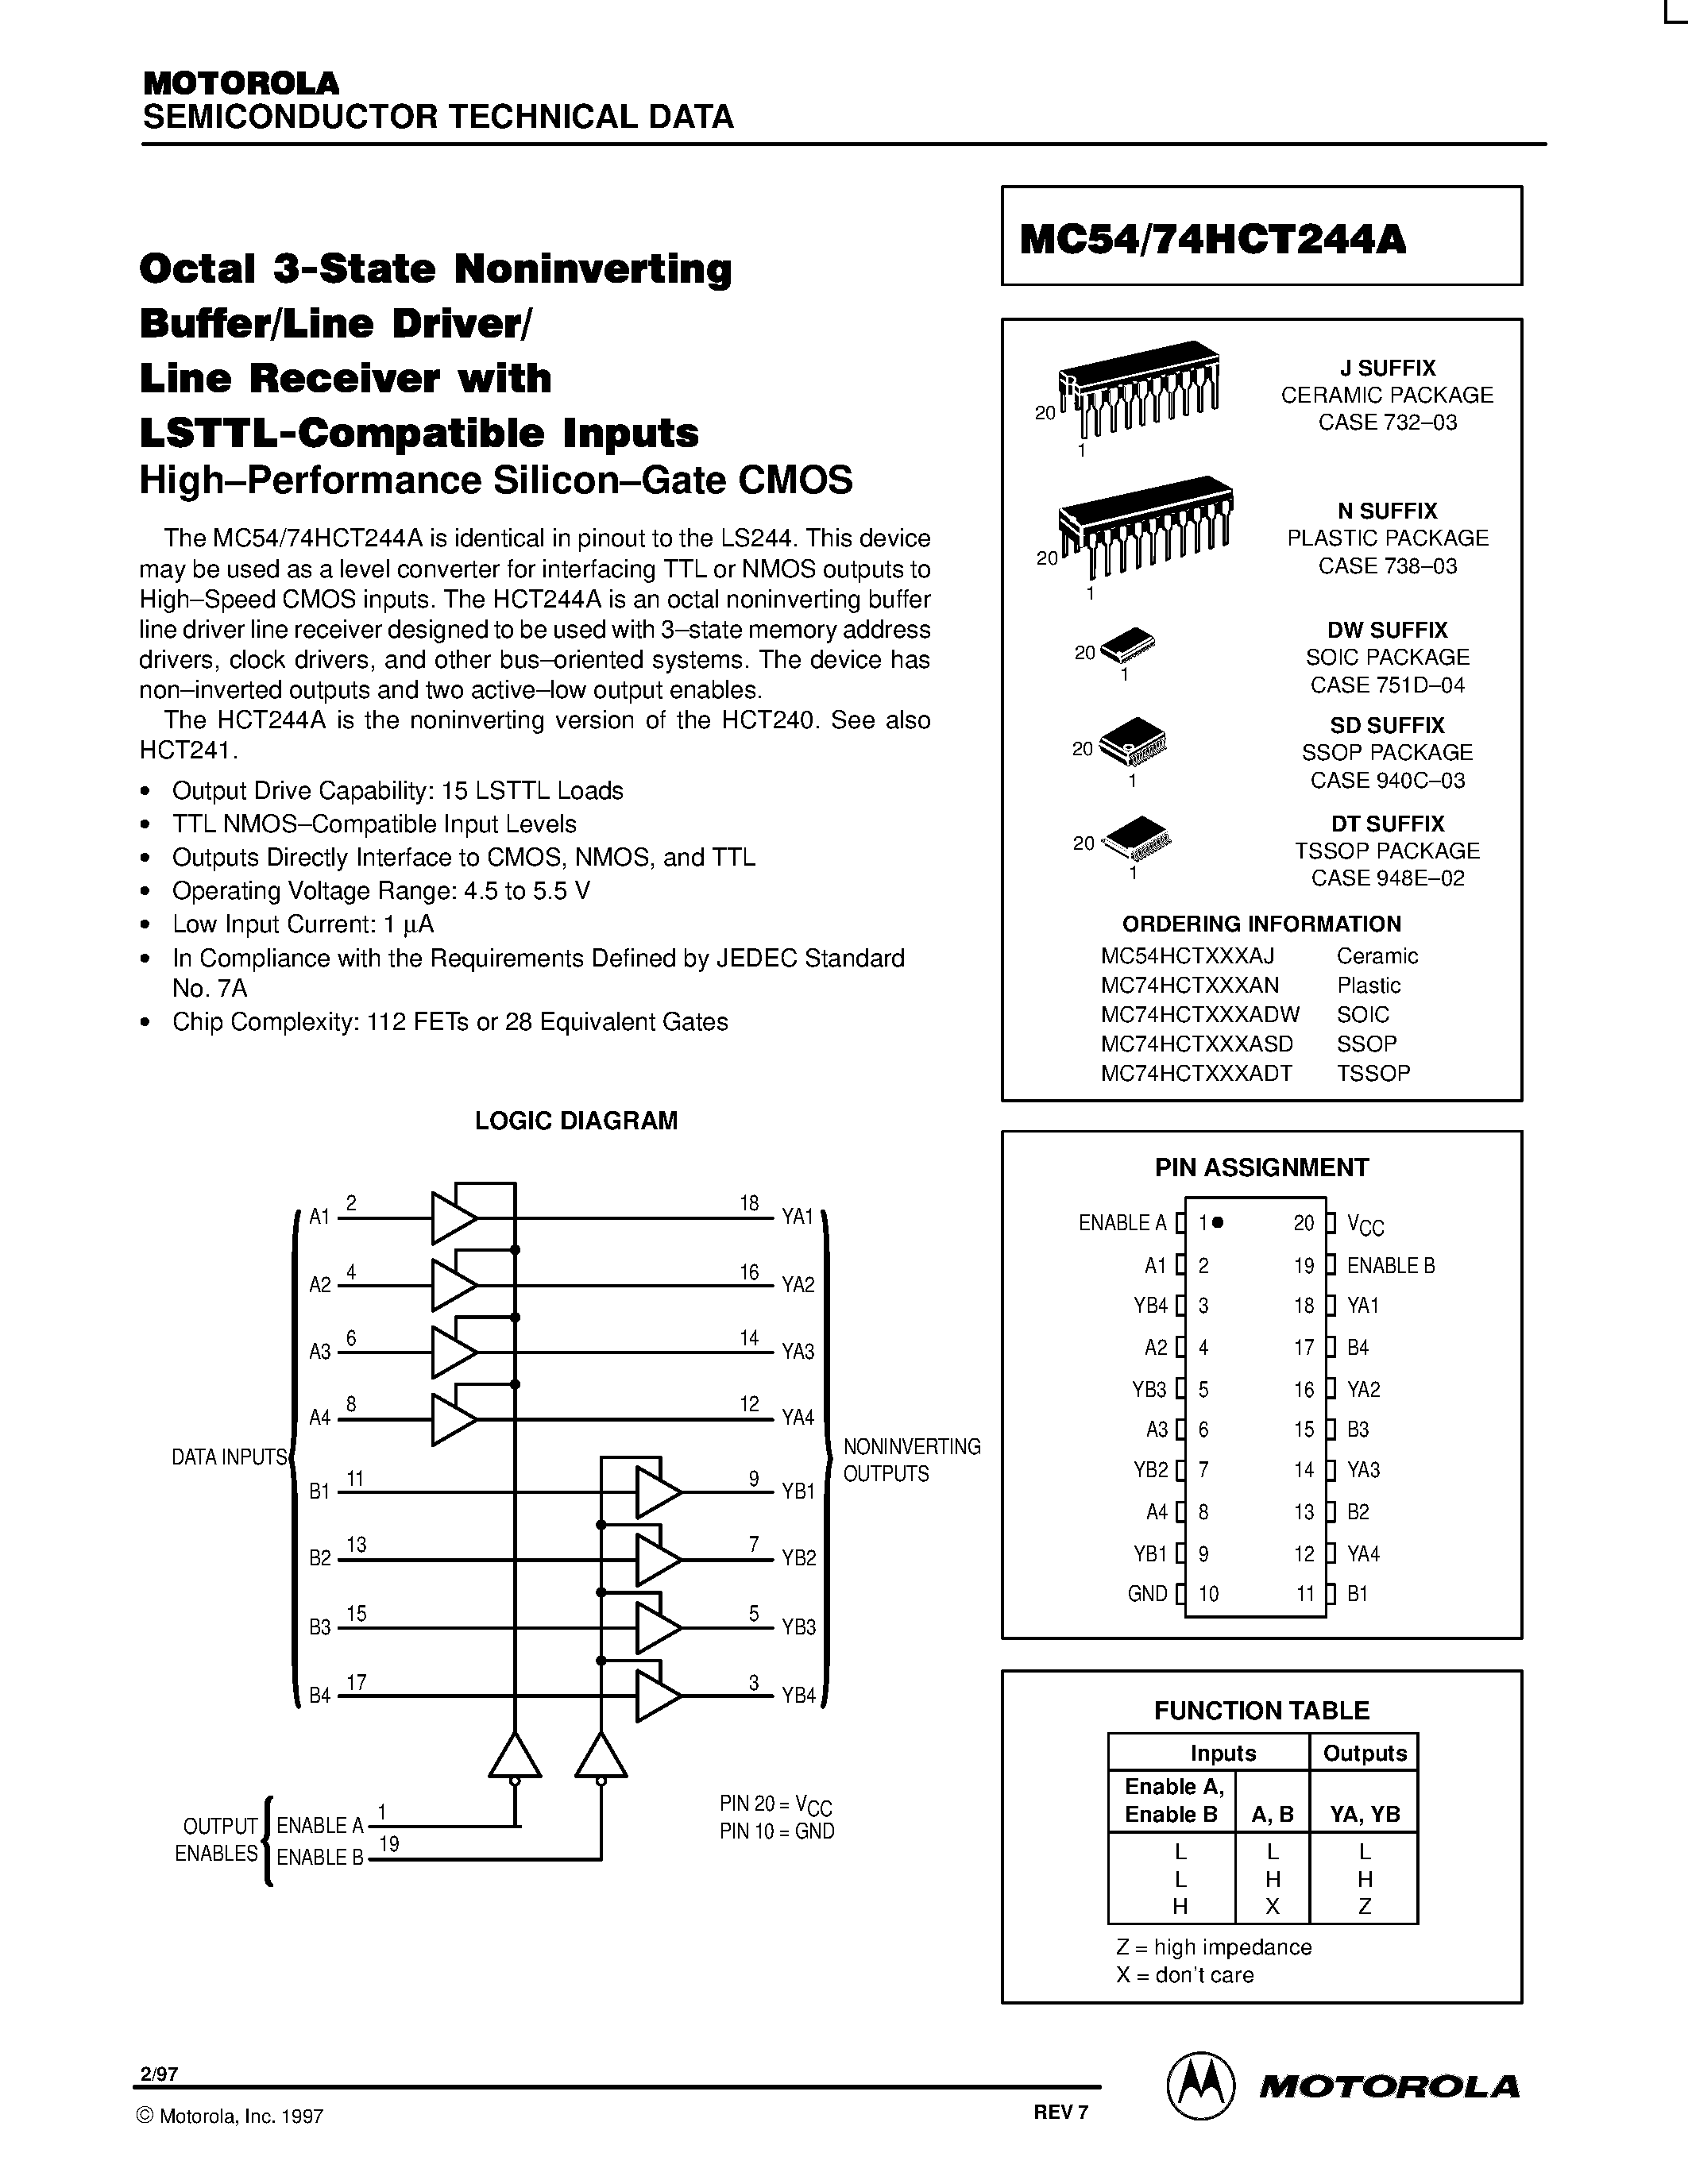 Datasheet MC54HCT244A - Octal 3-State Noninverting Buffer/Line Driver/Line Receiver page 1